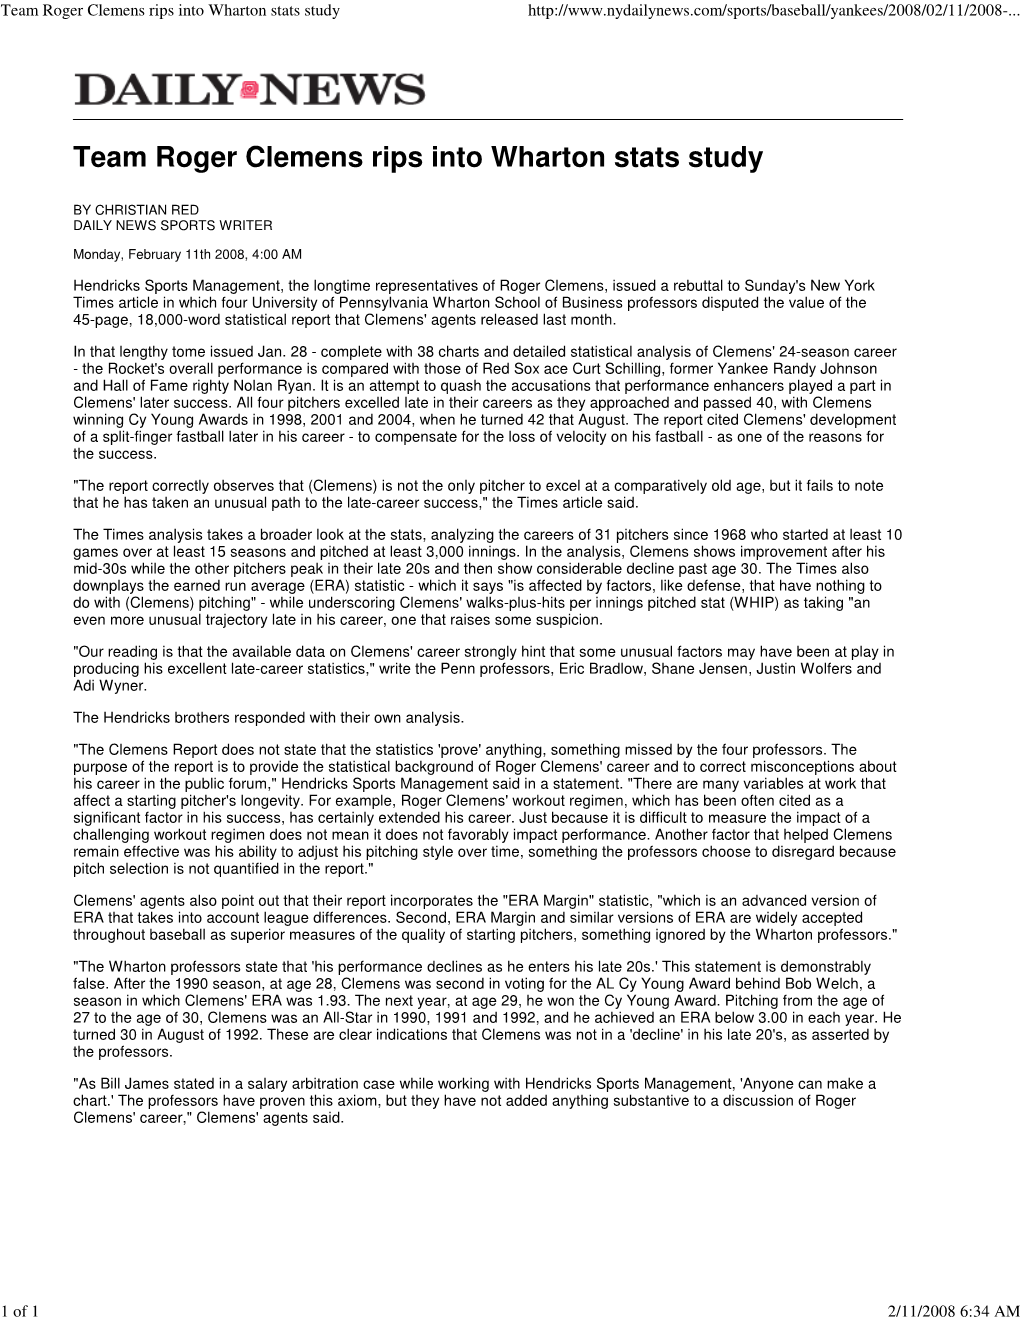 Team Roger Clemens Rips Into Wharton Stats Study